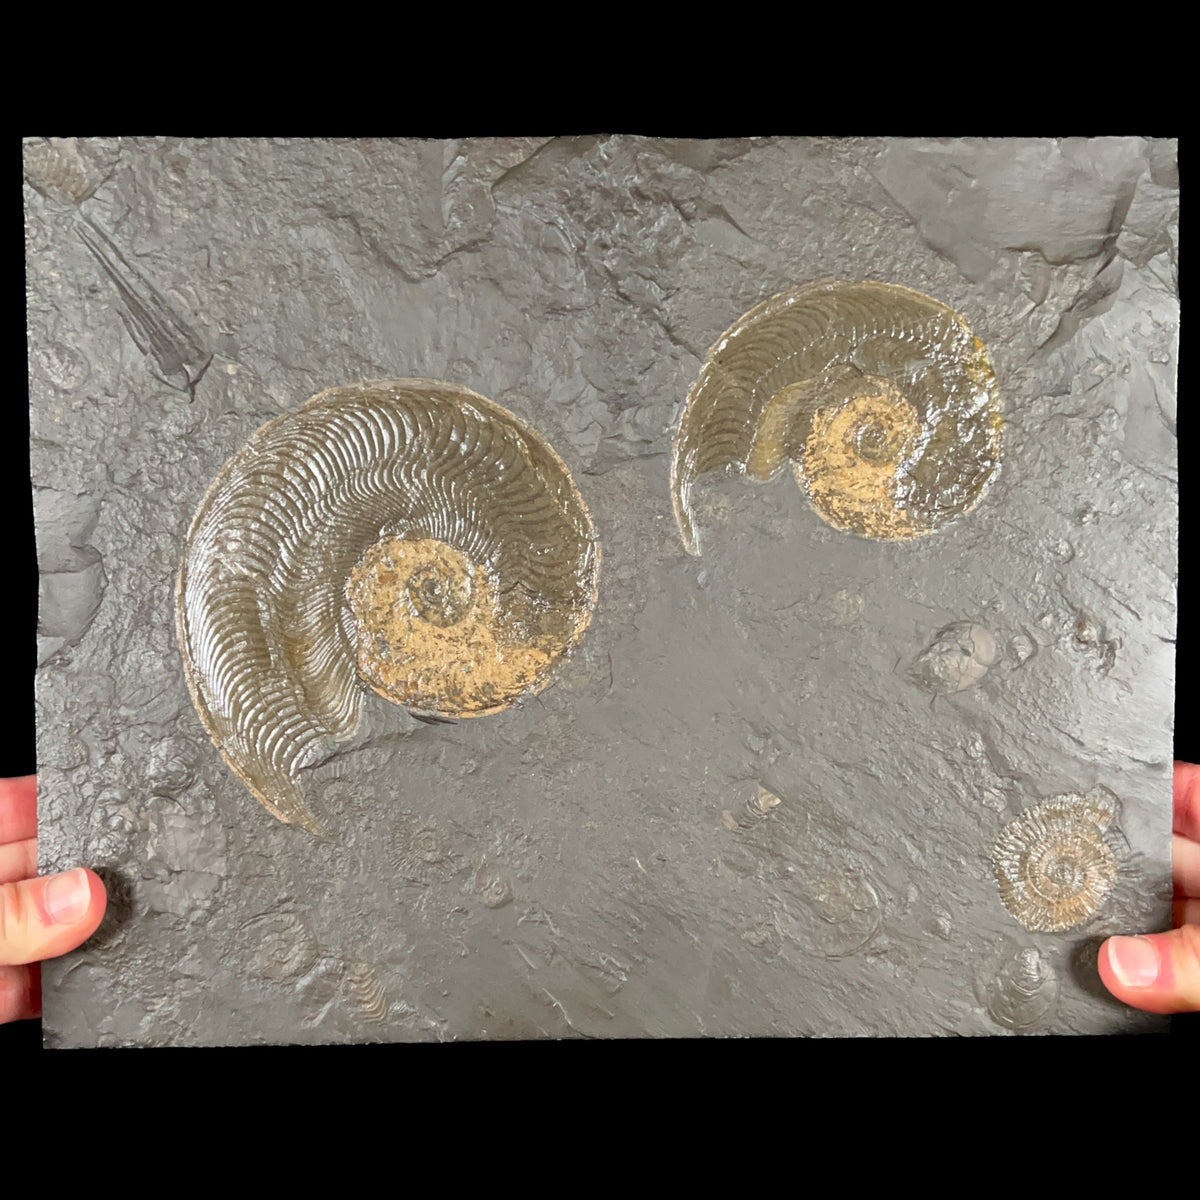 Large Harpoceras Ammonite and Dactylioceras Fossil in Shale Matrix Germany